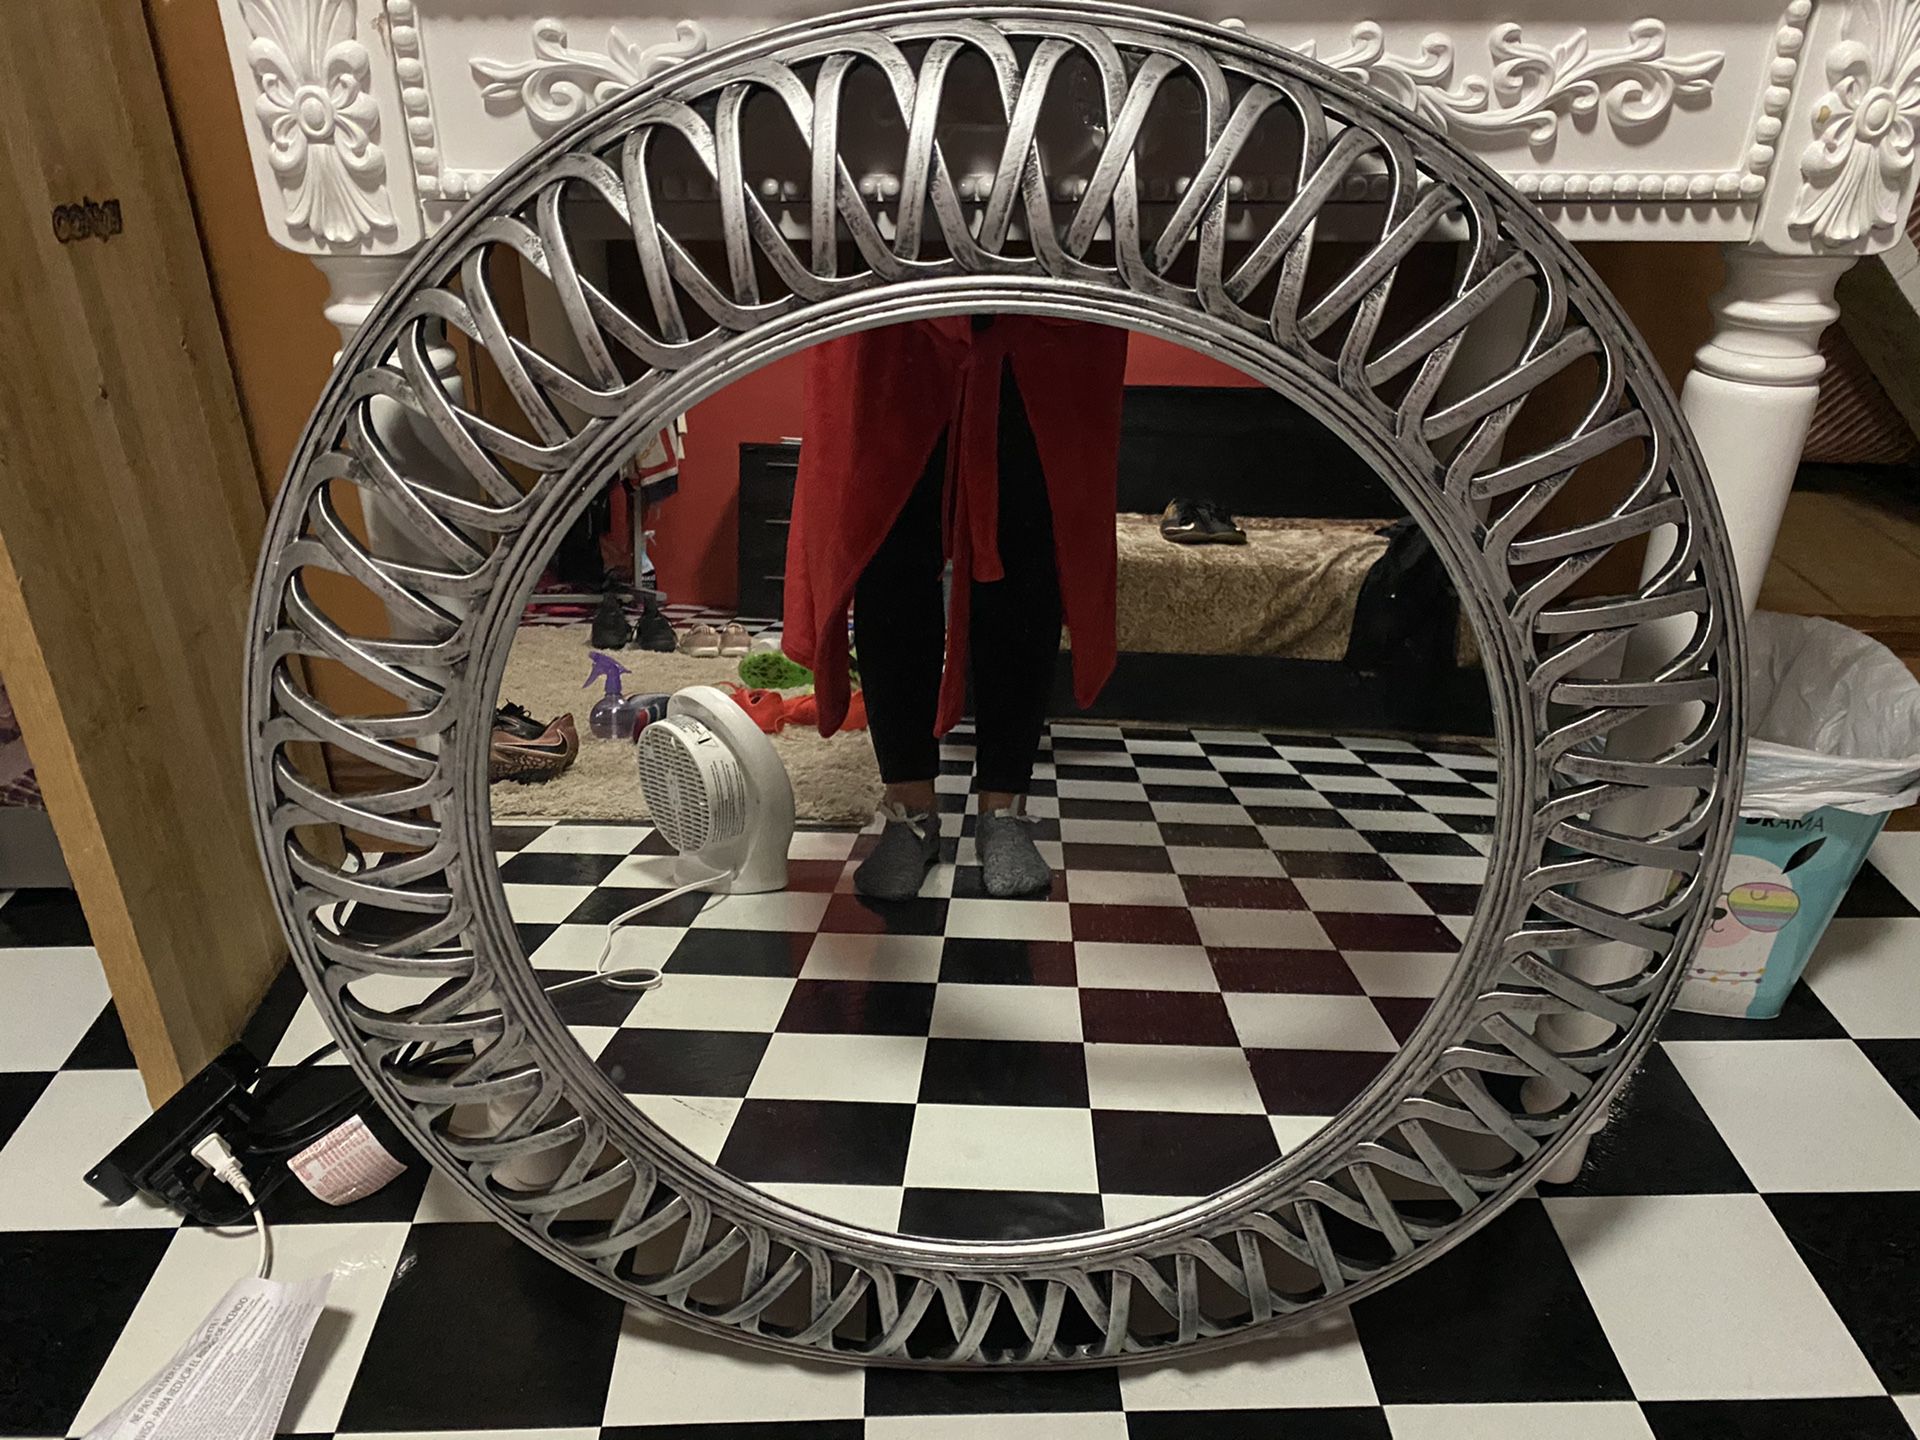 Beautiful mirror bought it two weeks ago !